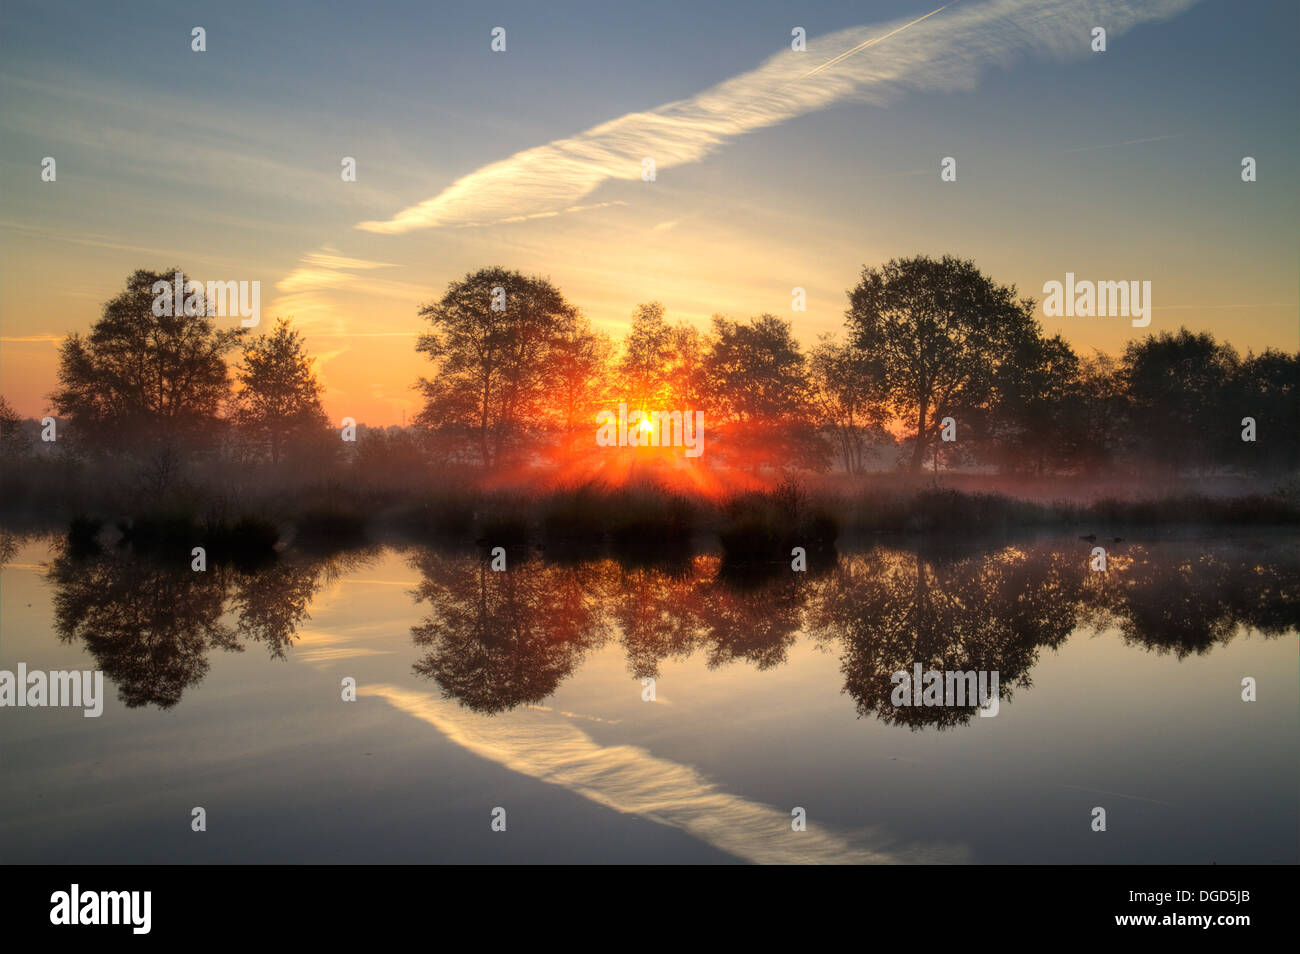 Sunrise above a lake; tree silhouettes in the background Stock Photo